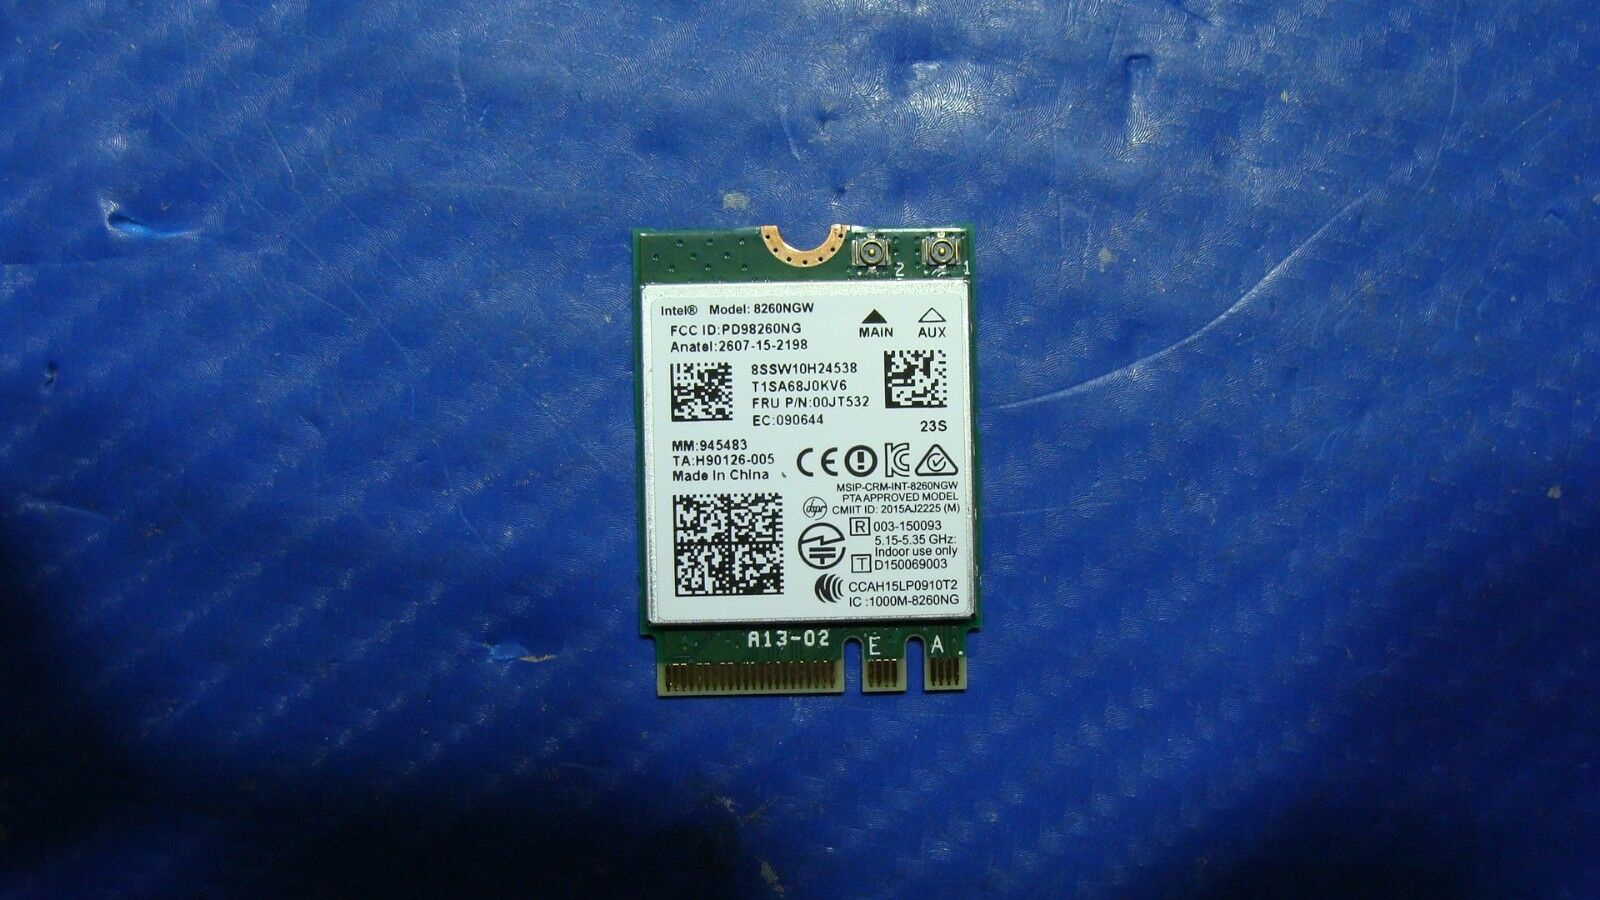 Lenovo ThinkPad T460s 14" Genuine Laptop WiFi Wireless Card 8260NGW 00JT532 - Laptop Parts - Buy Authentic Computer Parts - Top Seller Ebay